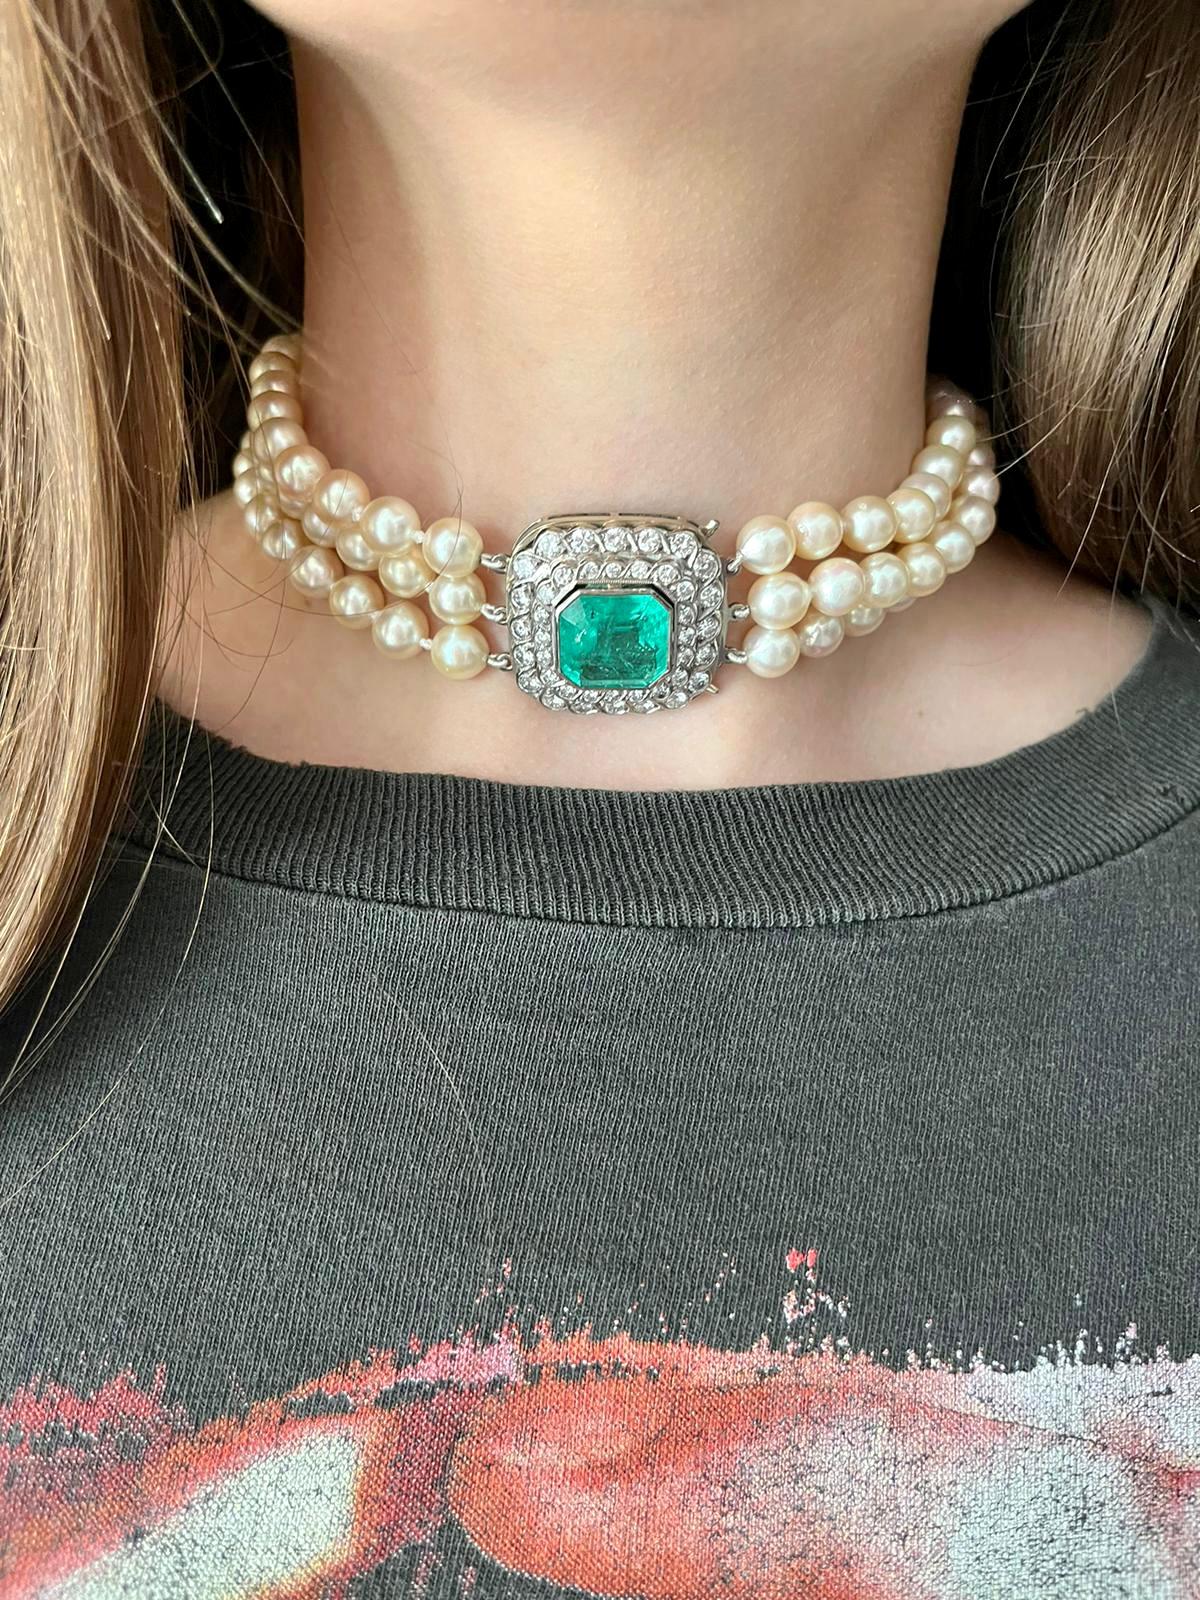 10 Carat Emerald & 3.60CTW Diamond Pearl Choker Necklace in 18K White Gold  For Sale 5